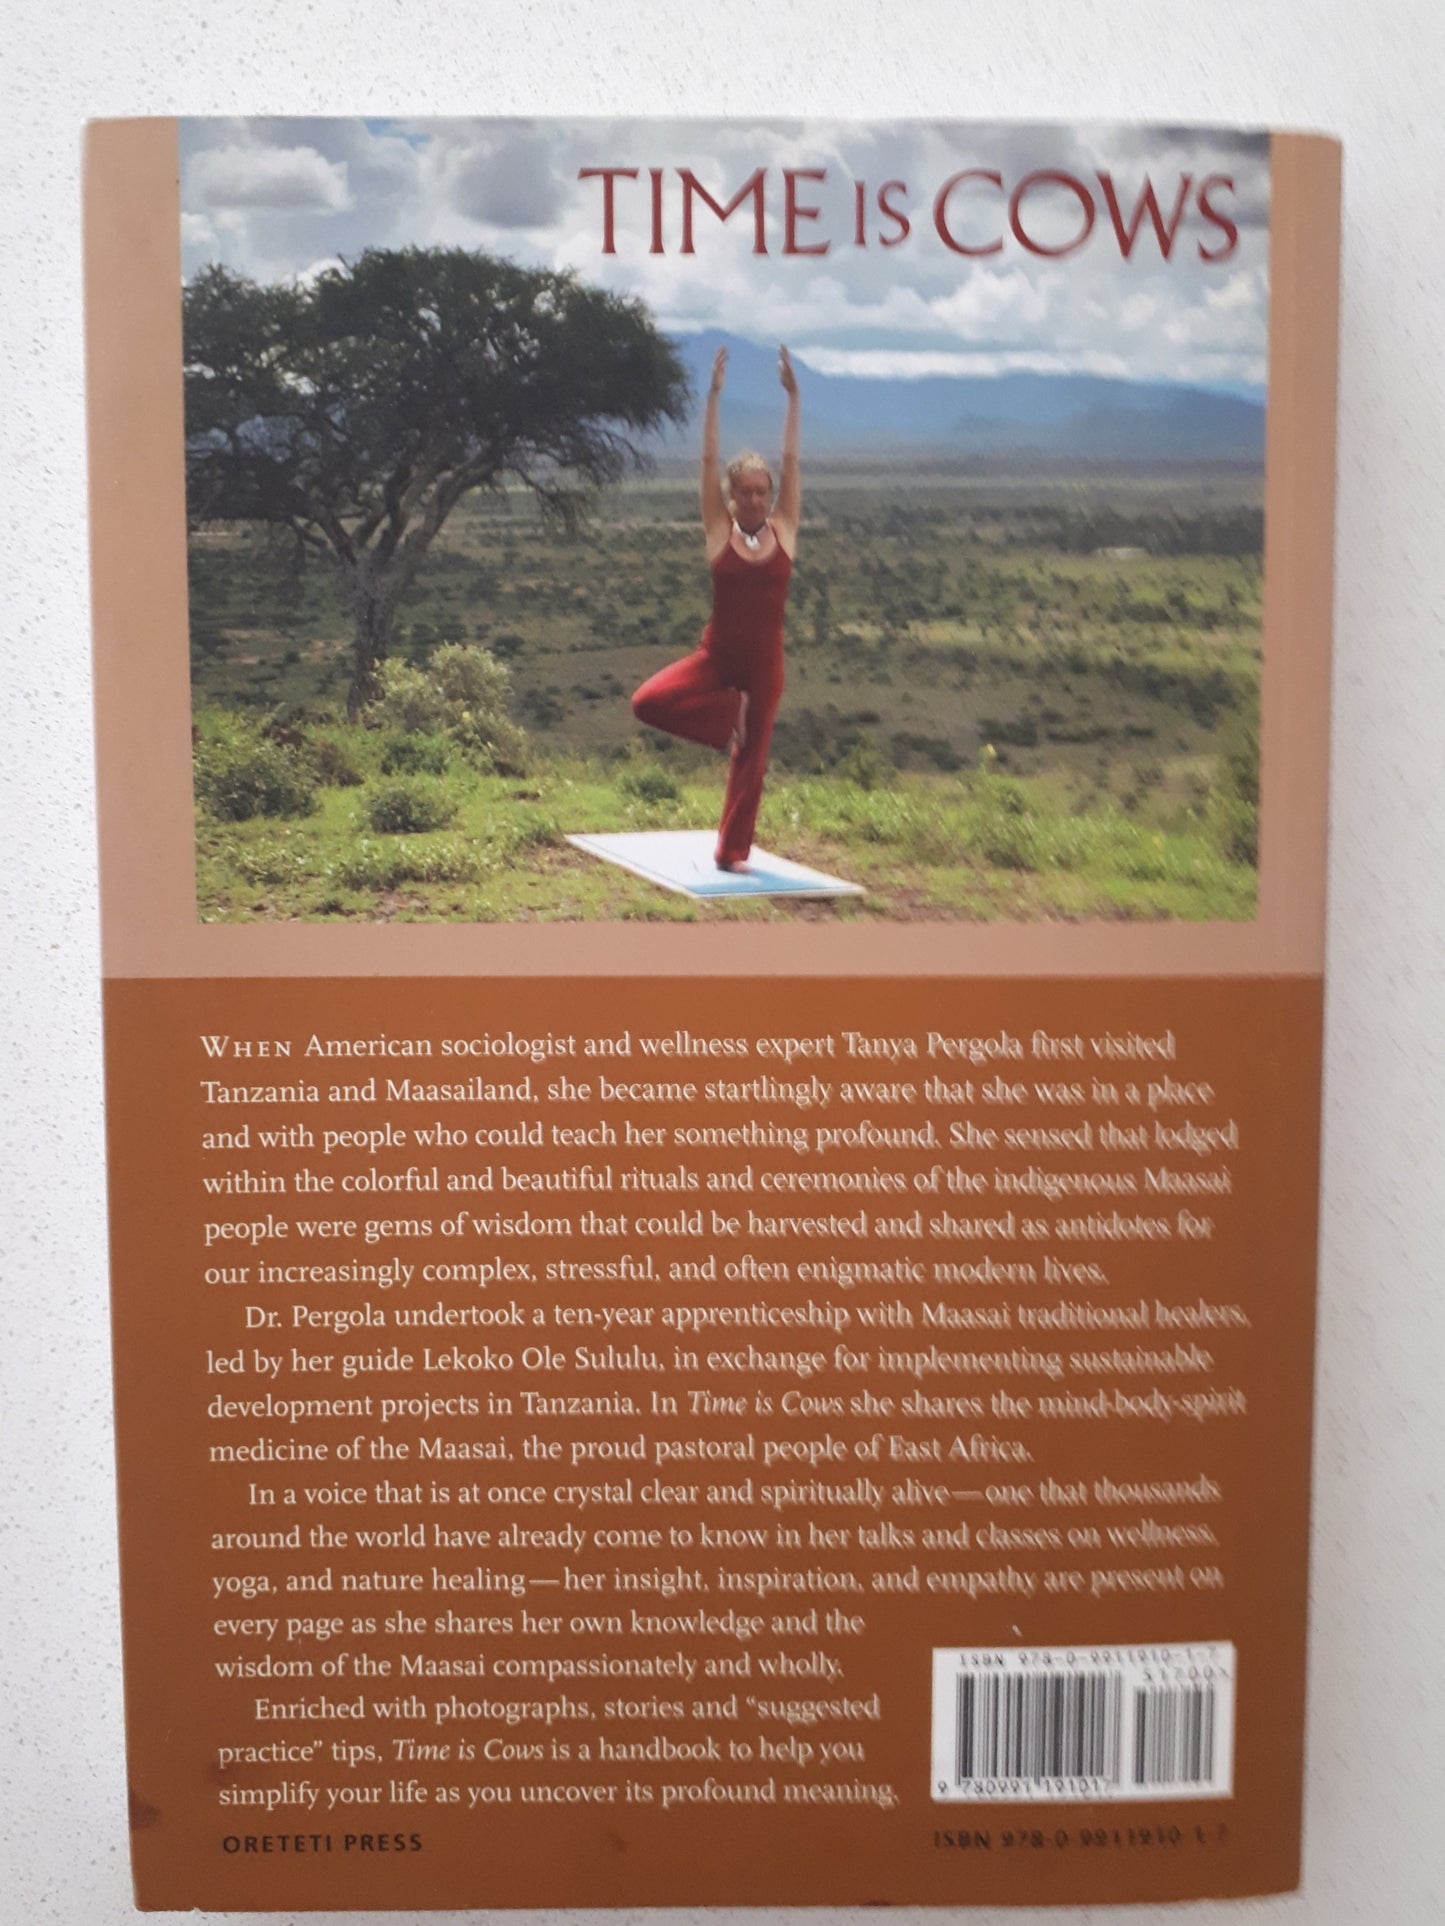 Time Is Cows Timeless Wisdom Of The Maasai by Tanya Pergola